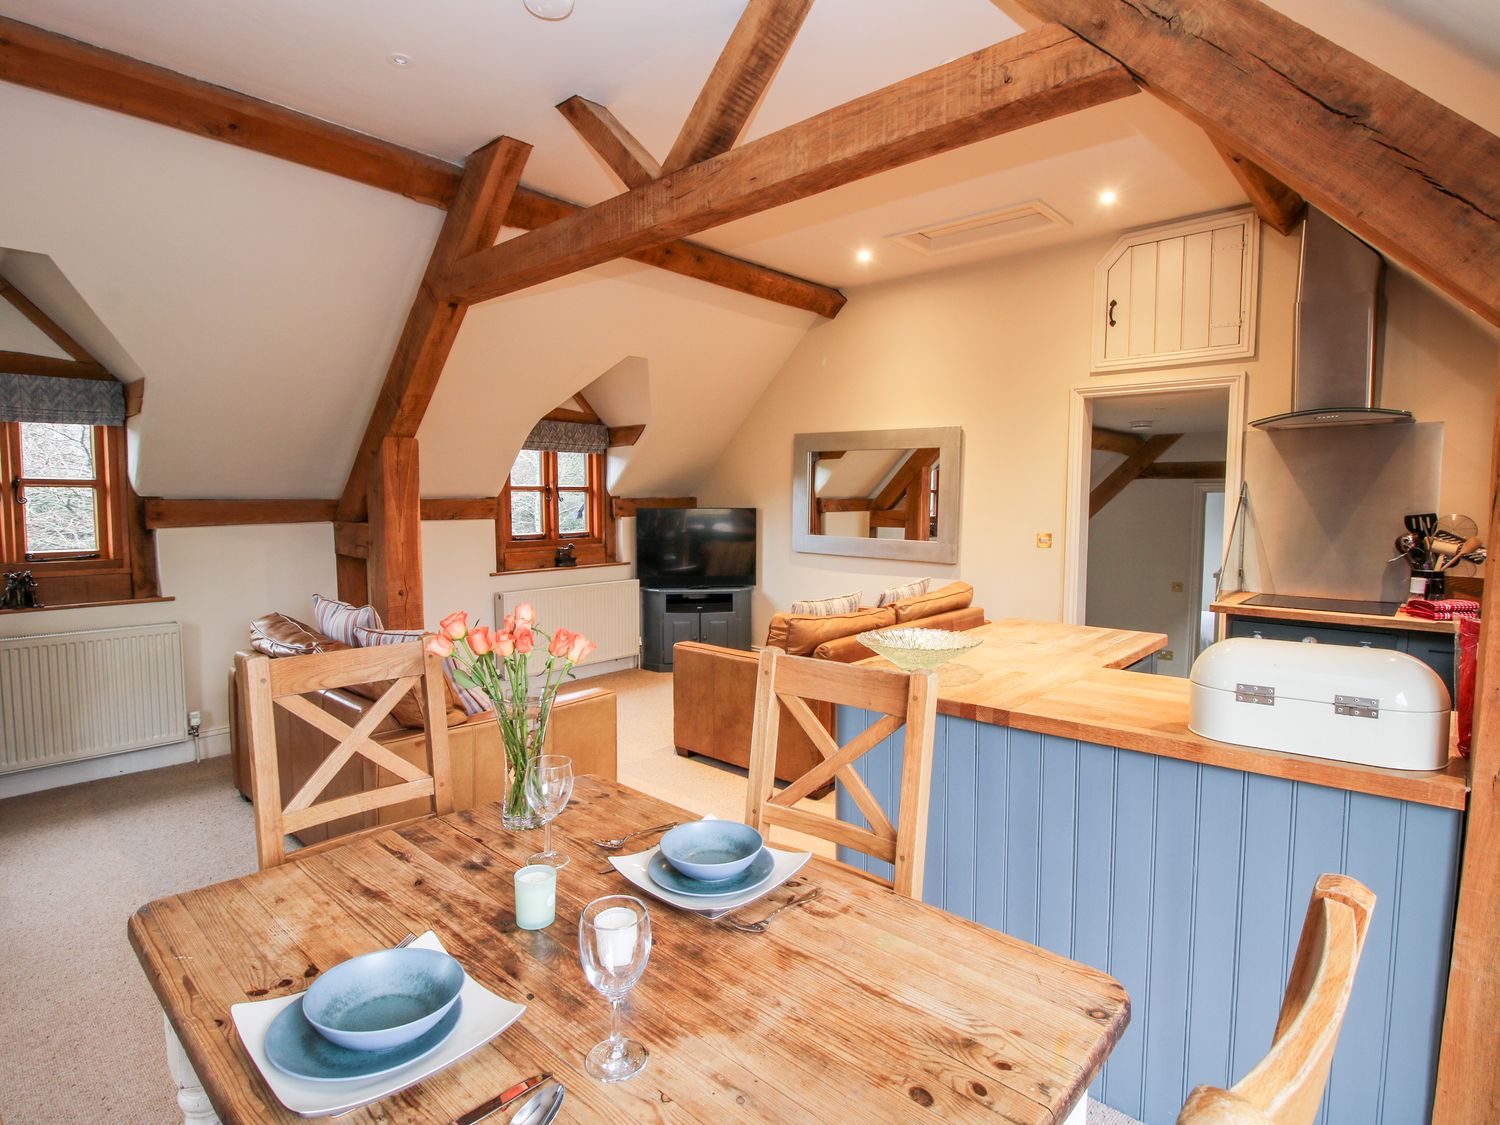 Pultheley Cottage, Churchstoke, Shropshire. First-floor apartment. Perfect for two. Open-plan living